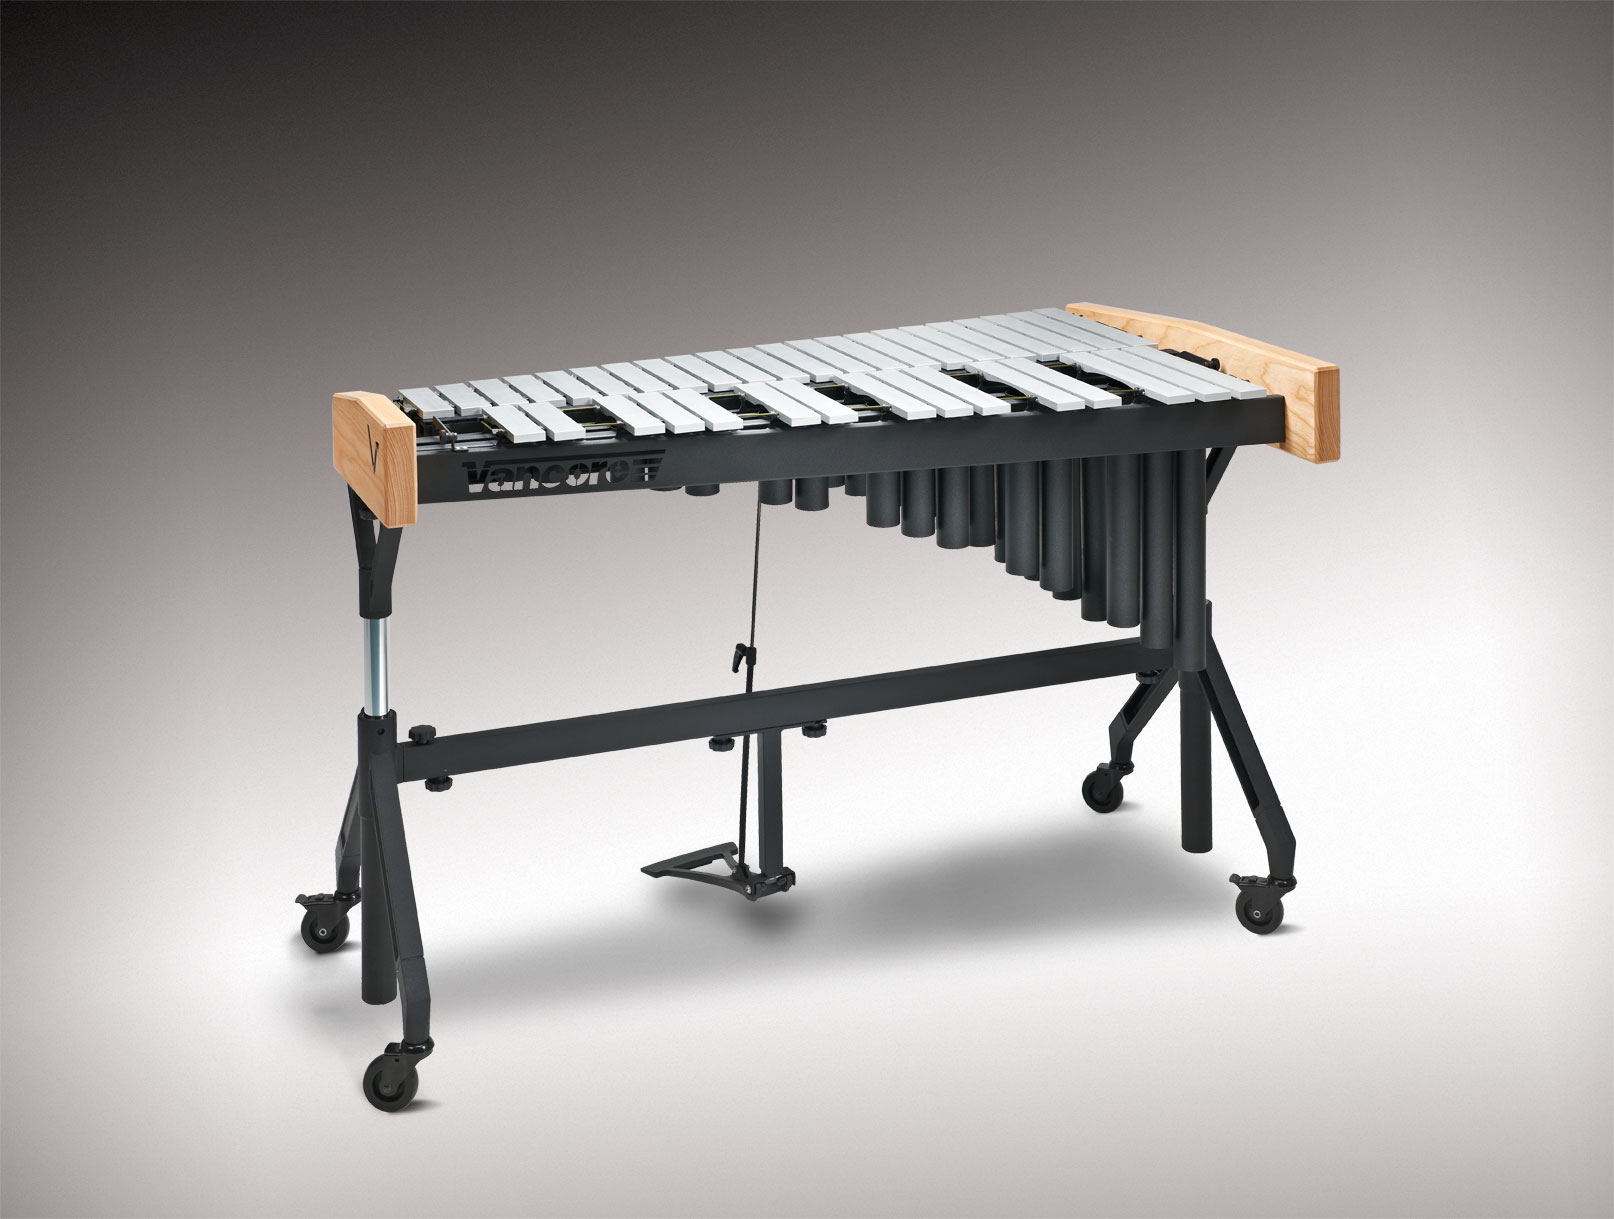 PSV 1001 Vibraphone Performing Standard 3 Oit. Without Motor Silver